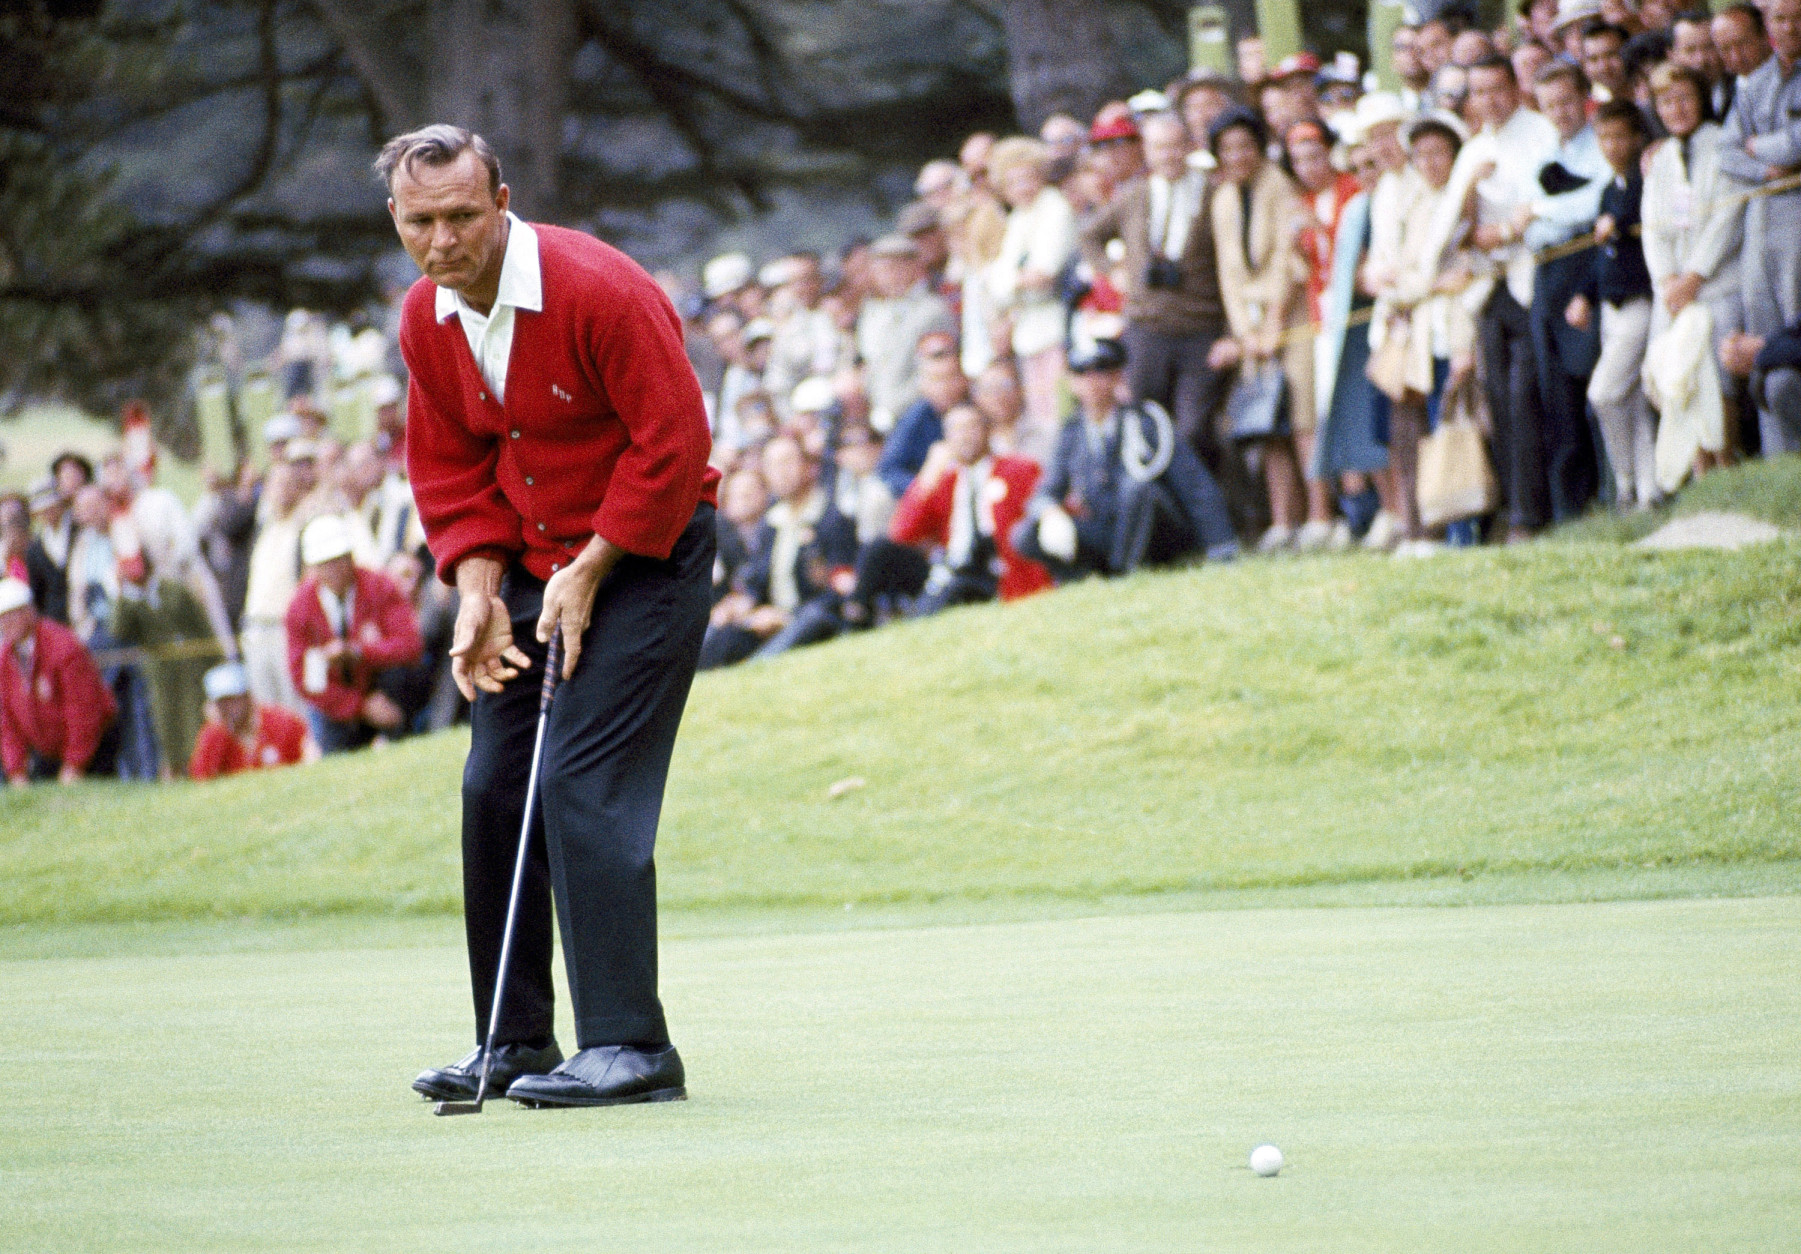 File-This June 19, 1966, file photo shows Arnold Palmer in action during the U.S.Open Golf Championship at Olympic Country Club, San Francisco, Calif.  Palmer, who made golf popular for the masses with his hard-charging style, incomparable charisma and a personal touch that made him known throughout the golf world as "The King," died Sunday, Sept. 25, 2016, in Pittsburgh. He was 87. (AP Photo, File)